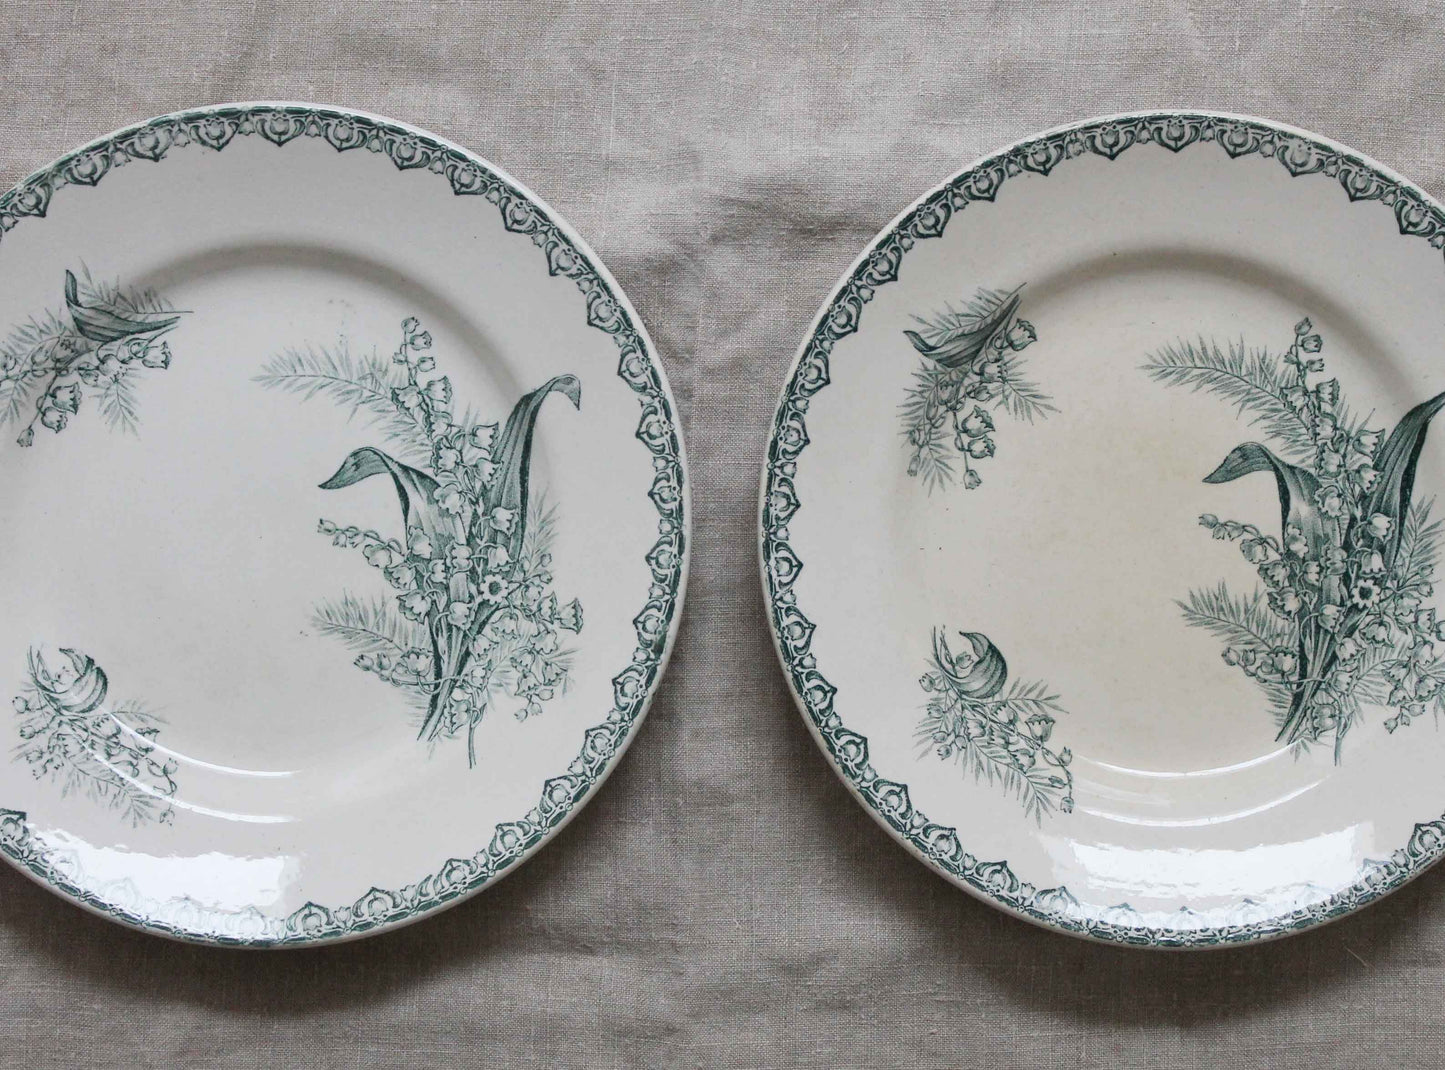 Vintage Lily of the Valley Plates